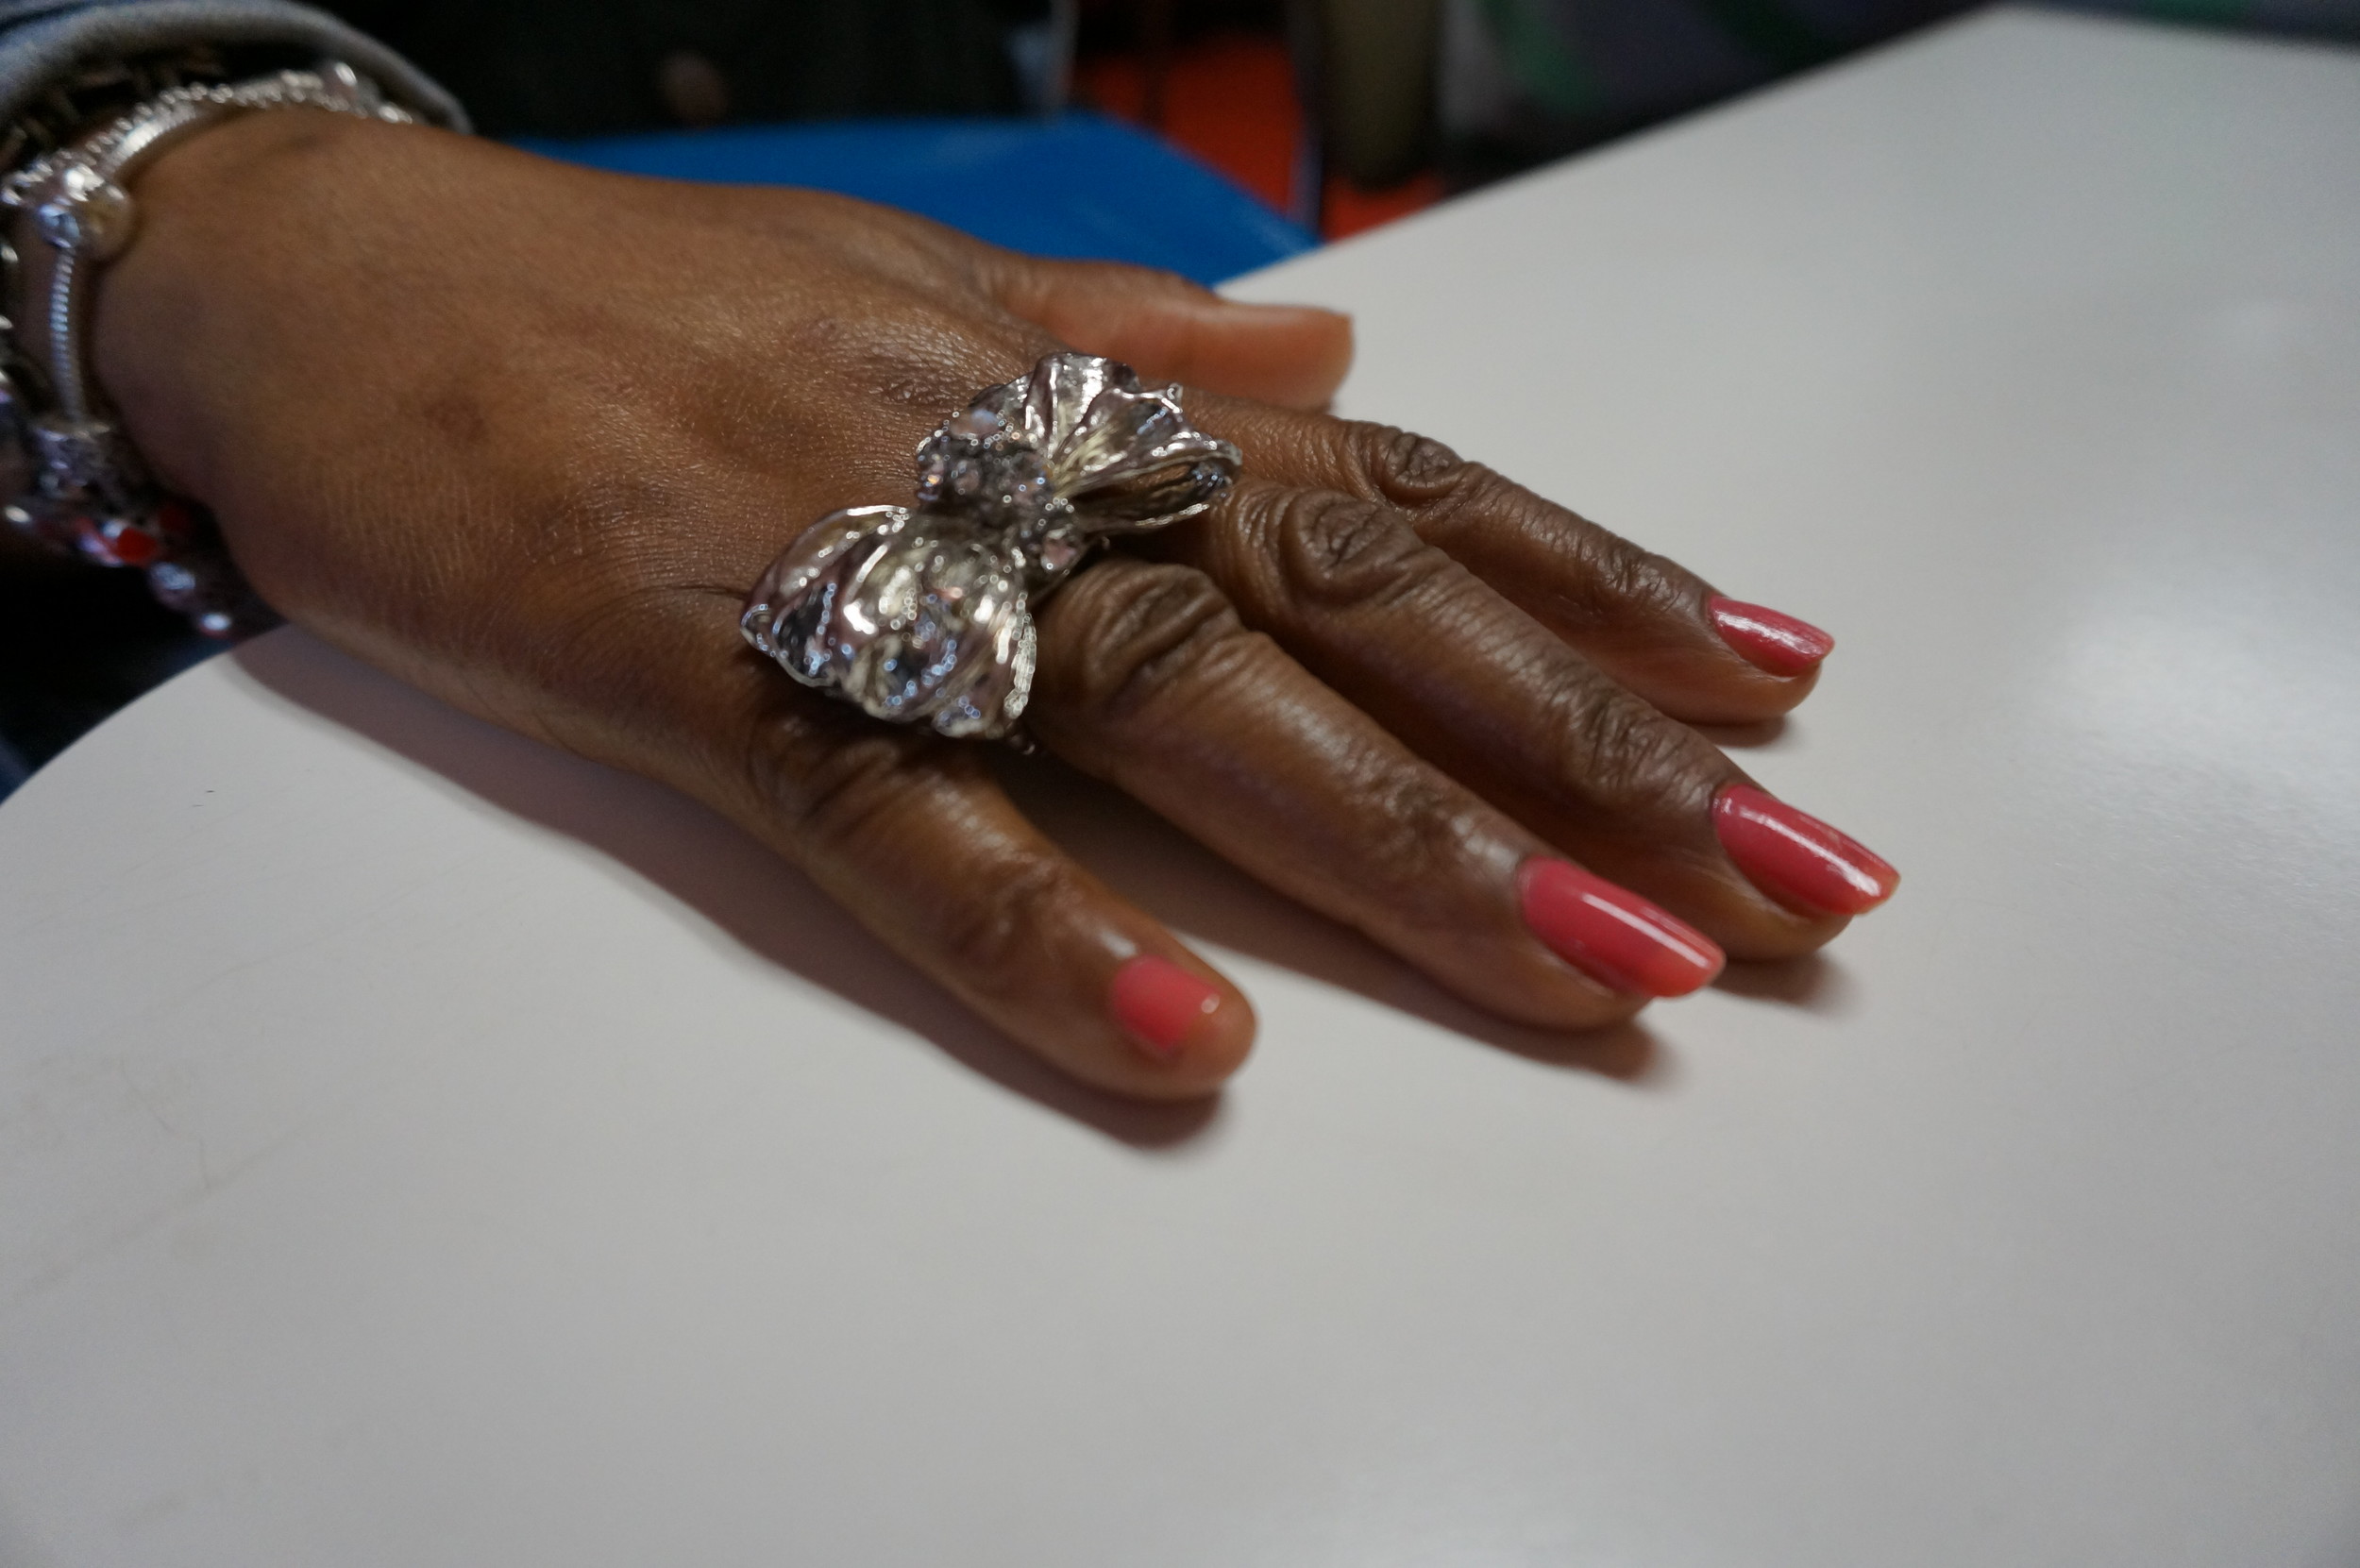  My mother wanted me to take a picture of her ring and nails lmao!&nbsp; 